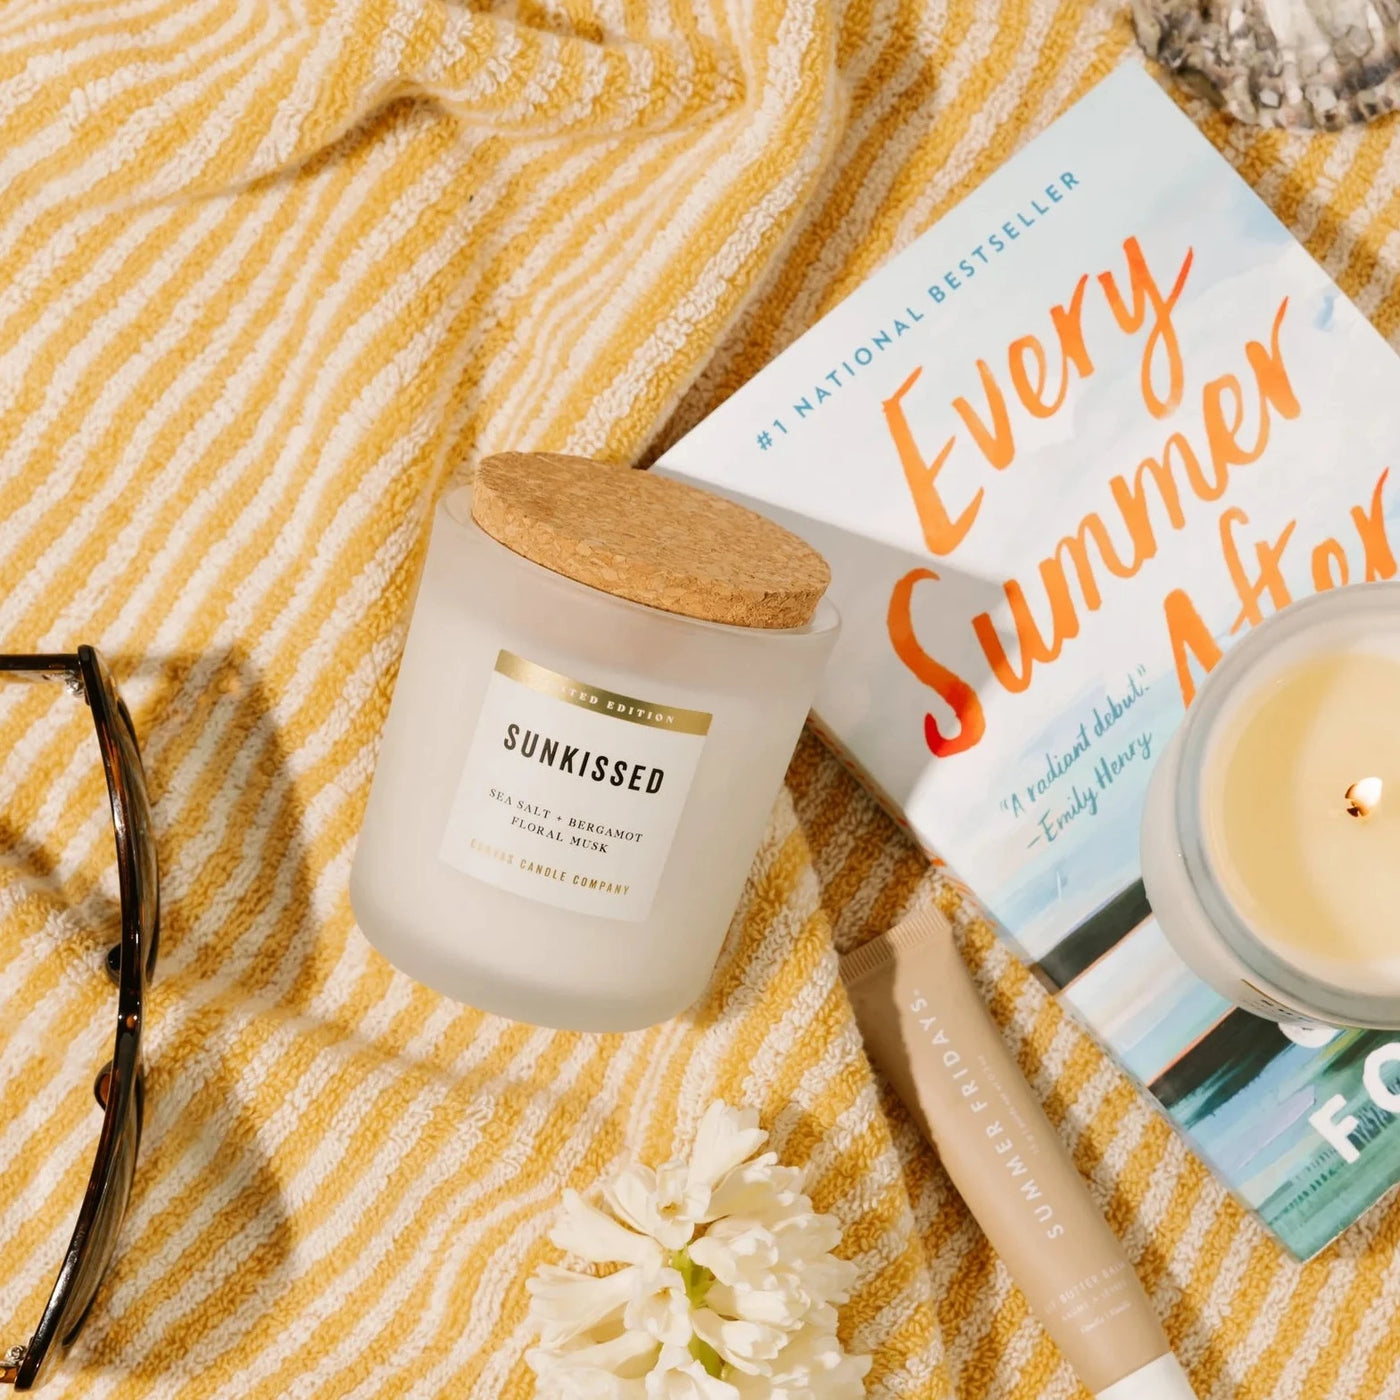 Canvas Candle Co. | Sunkissed Signature Candle, The Local Space, Local Canadian Brands